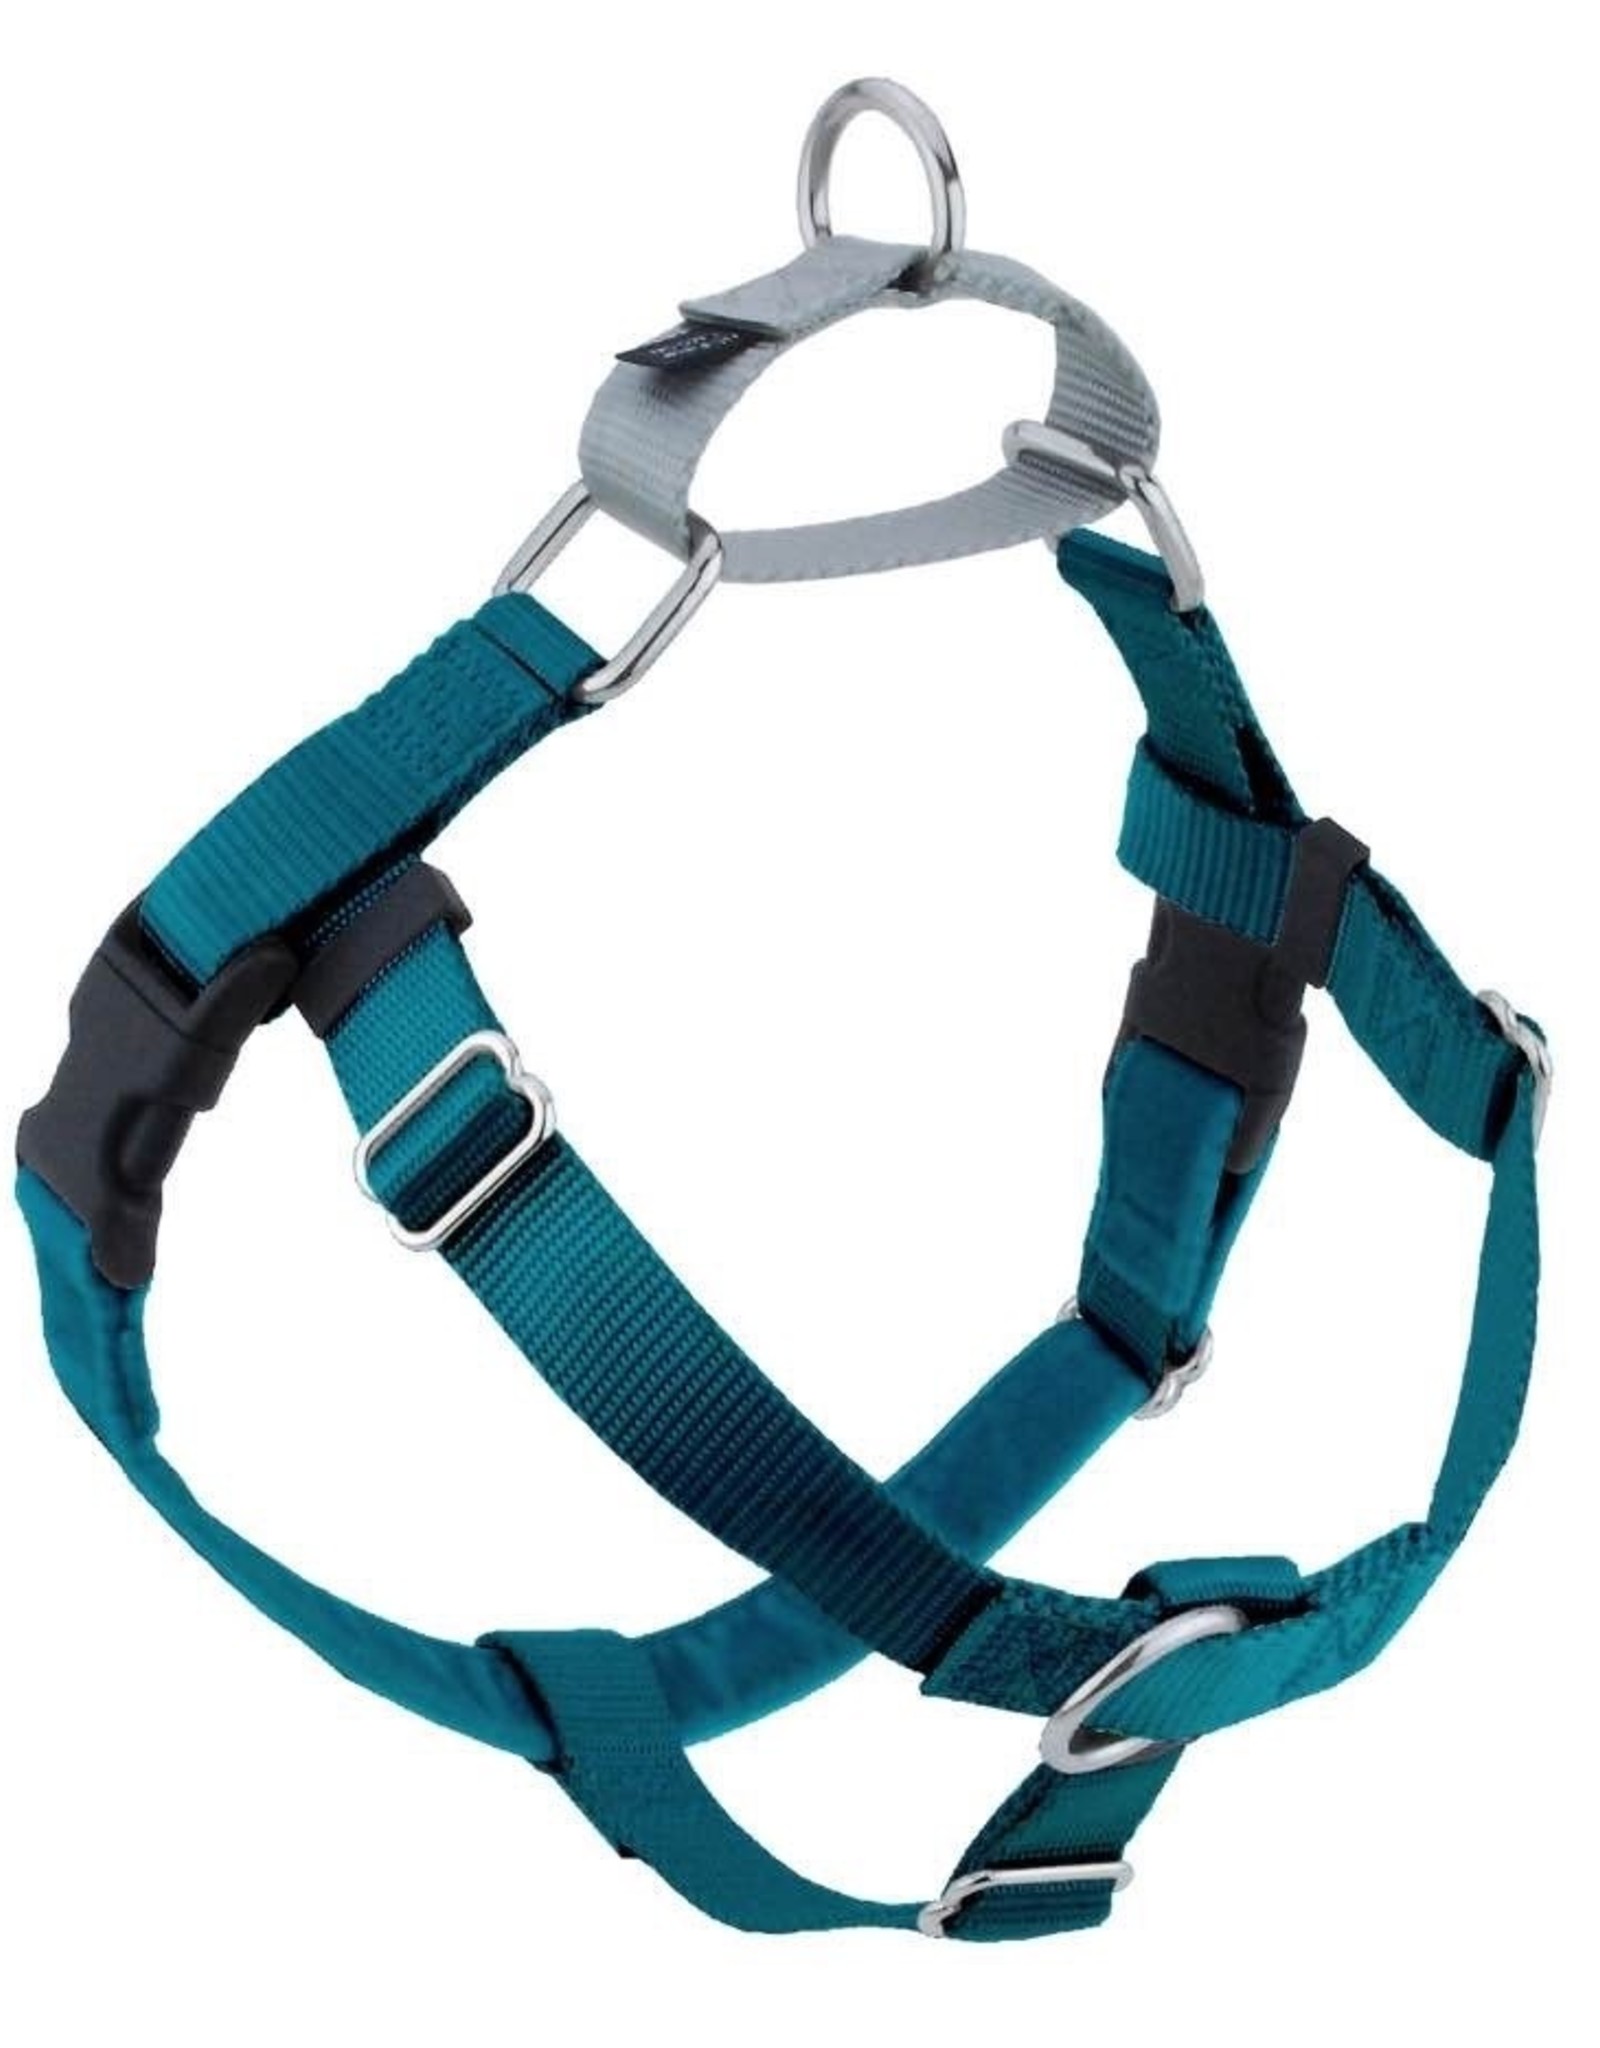 2 Hounds Design 1" Freedom Harness and Leash - Teal